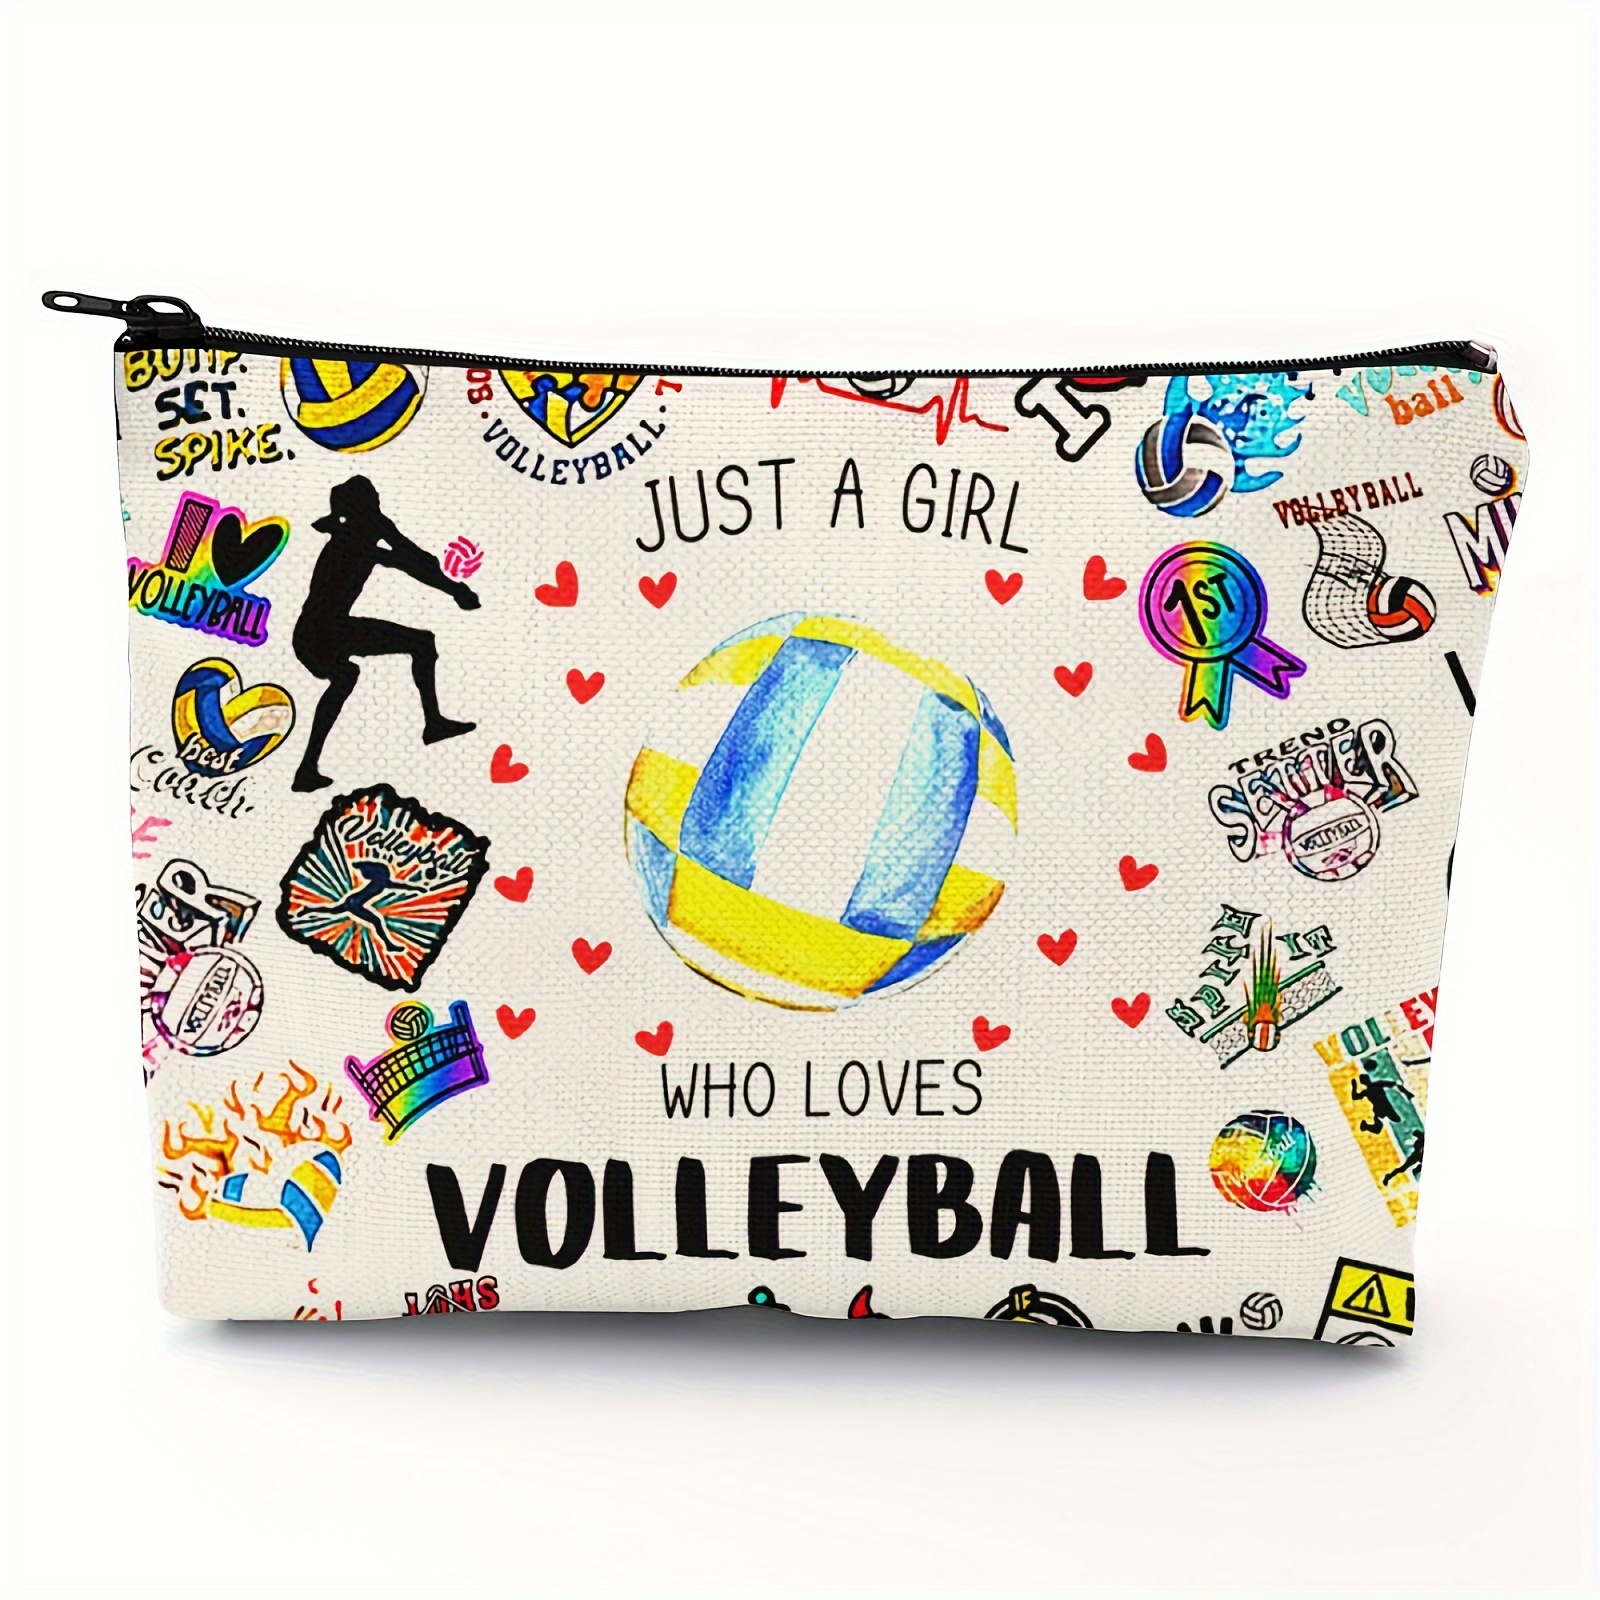 

Volleyball Inspirational Gifts For Women Volleyball Stuff Gifts For Teen Volleyball Players Teams, Birthday Gifts For Women Makeup Bag - Peace Love Volleyball